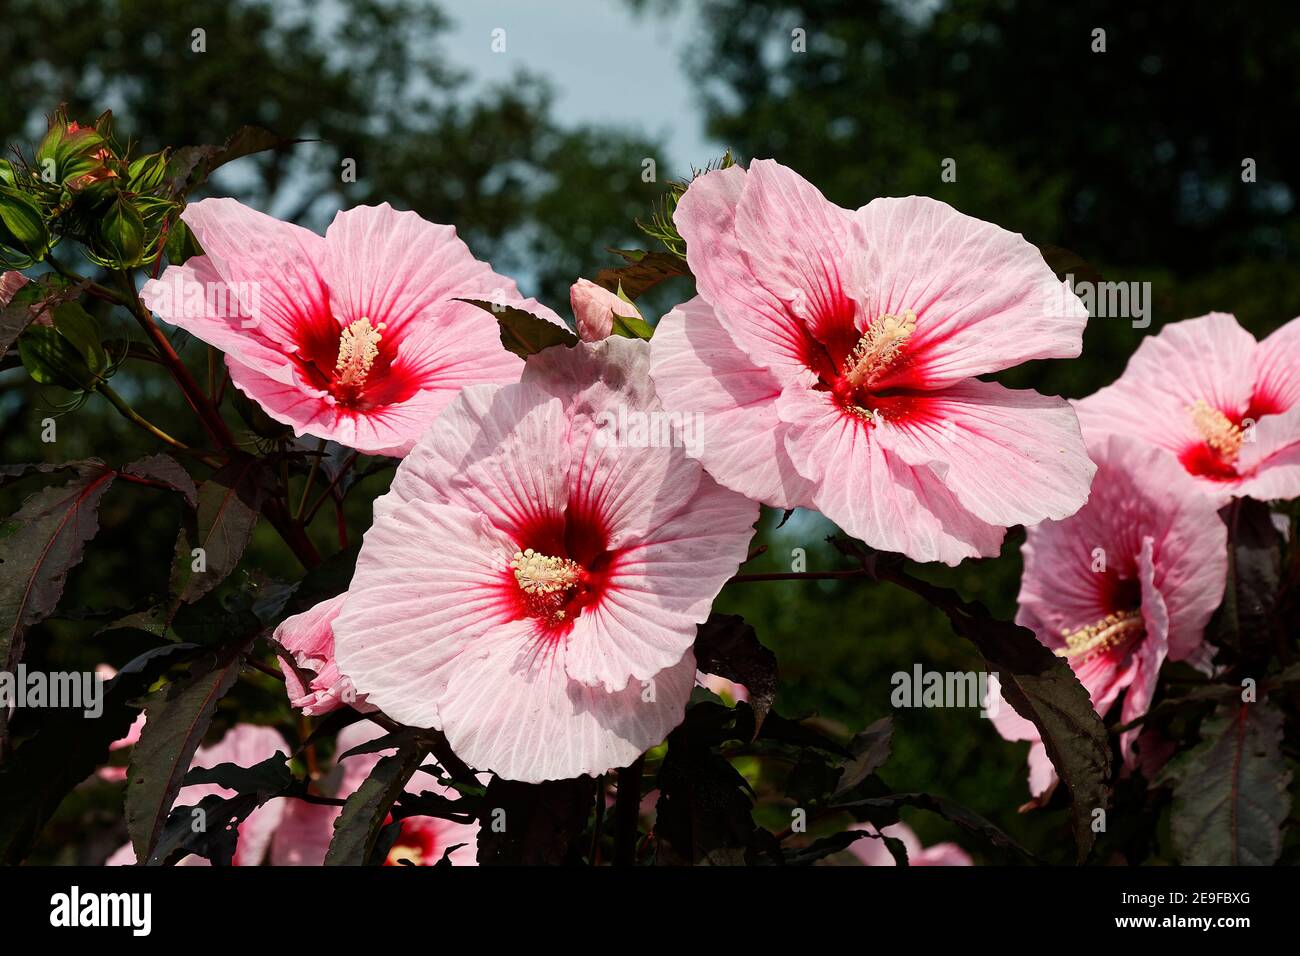 multiple hibiscus flowers, pink, yellow stamens, red centers, Malvaceae, tropical, cultivated,  PA; Pennsylvania; USA Stock Photo